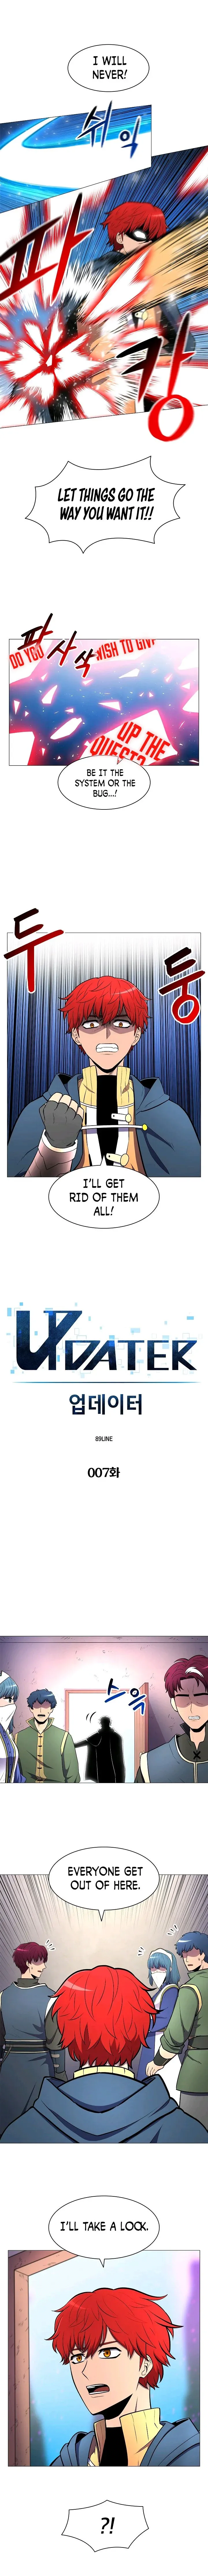 Updater Chapter 7 page 6